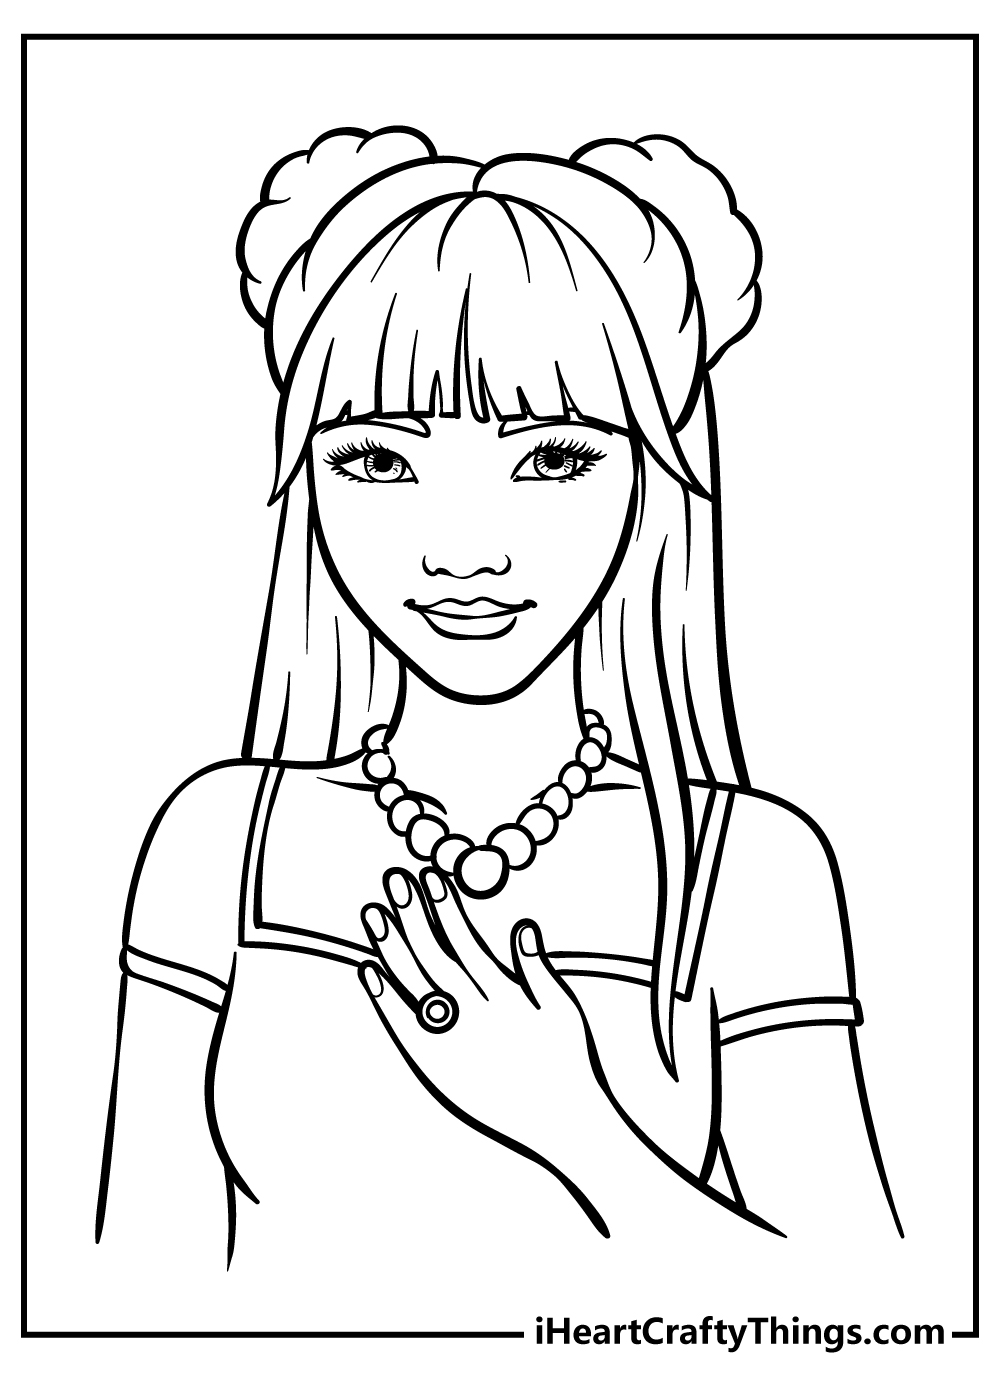 Printable Coloring Pages For Teens Updated 20